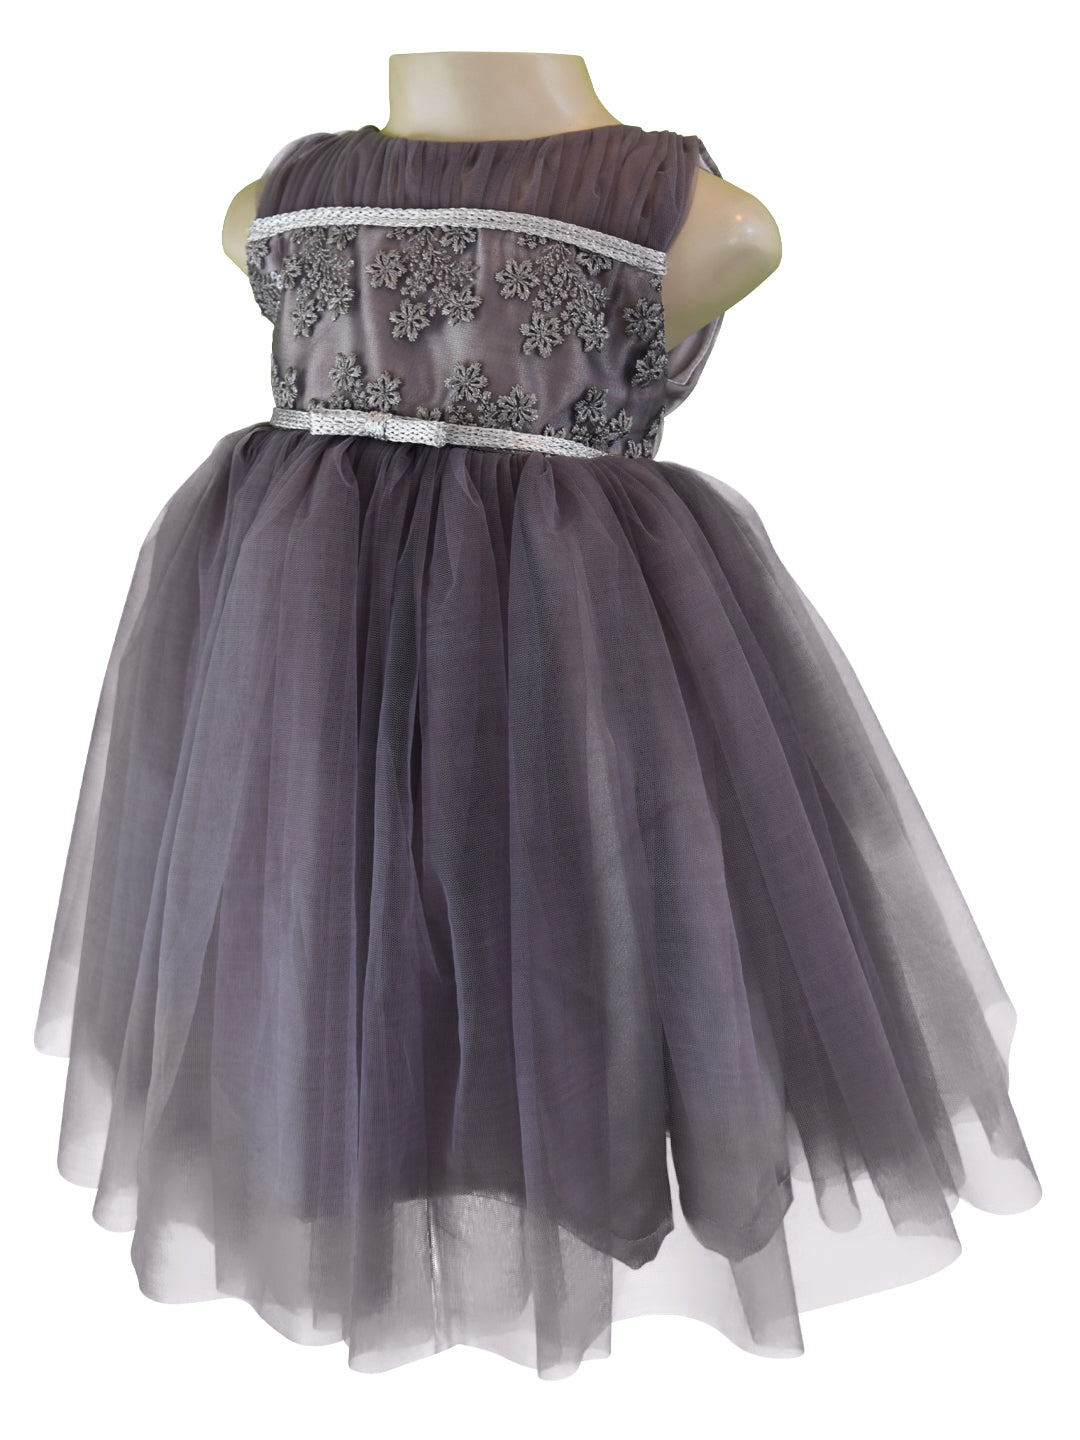 Party Dress_Faye Grey Embroidered Dress